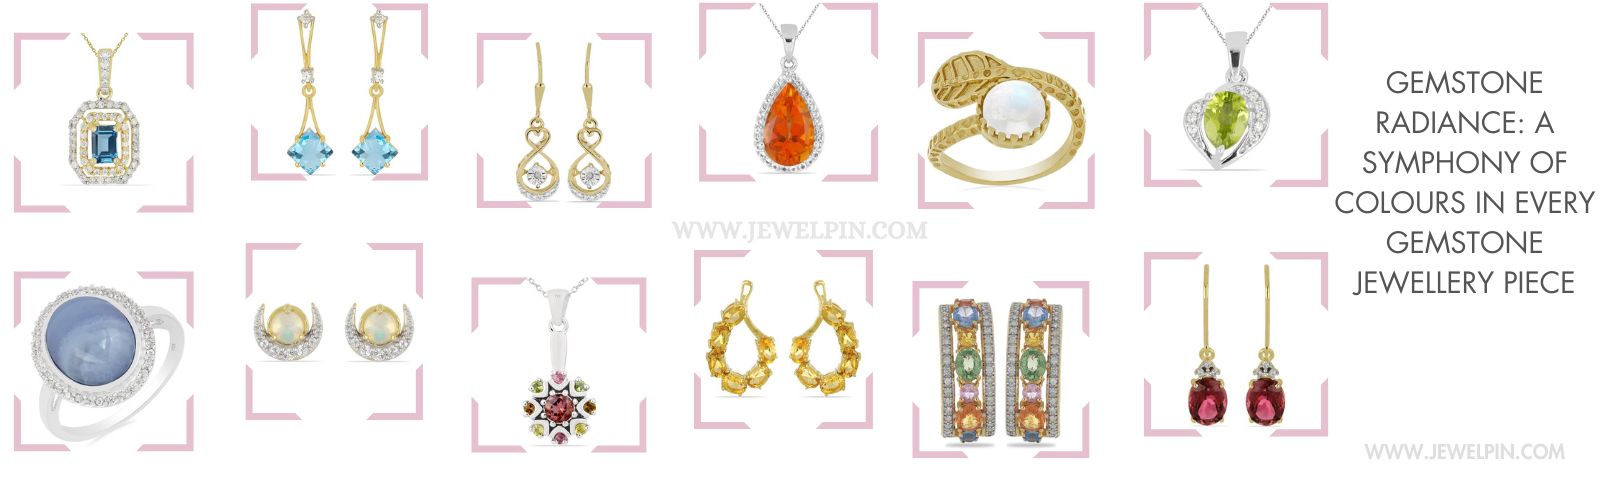 Gemstone Radiance from Jewelpin: A Symphony of Colours in Every Gemstone Jewellery Piece